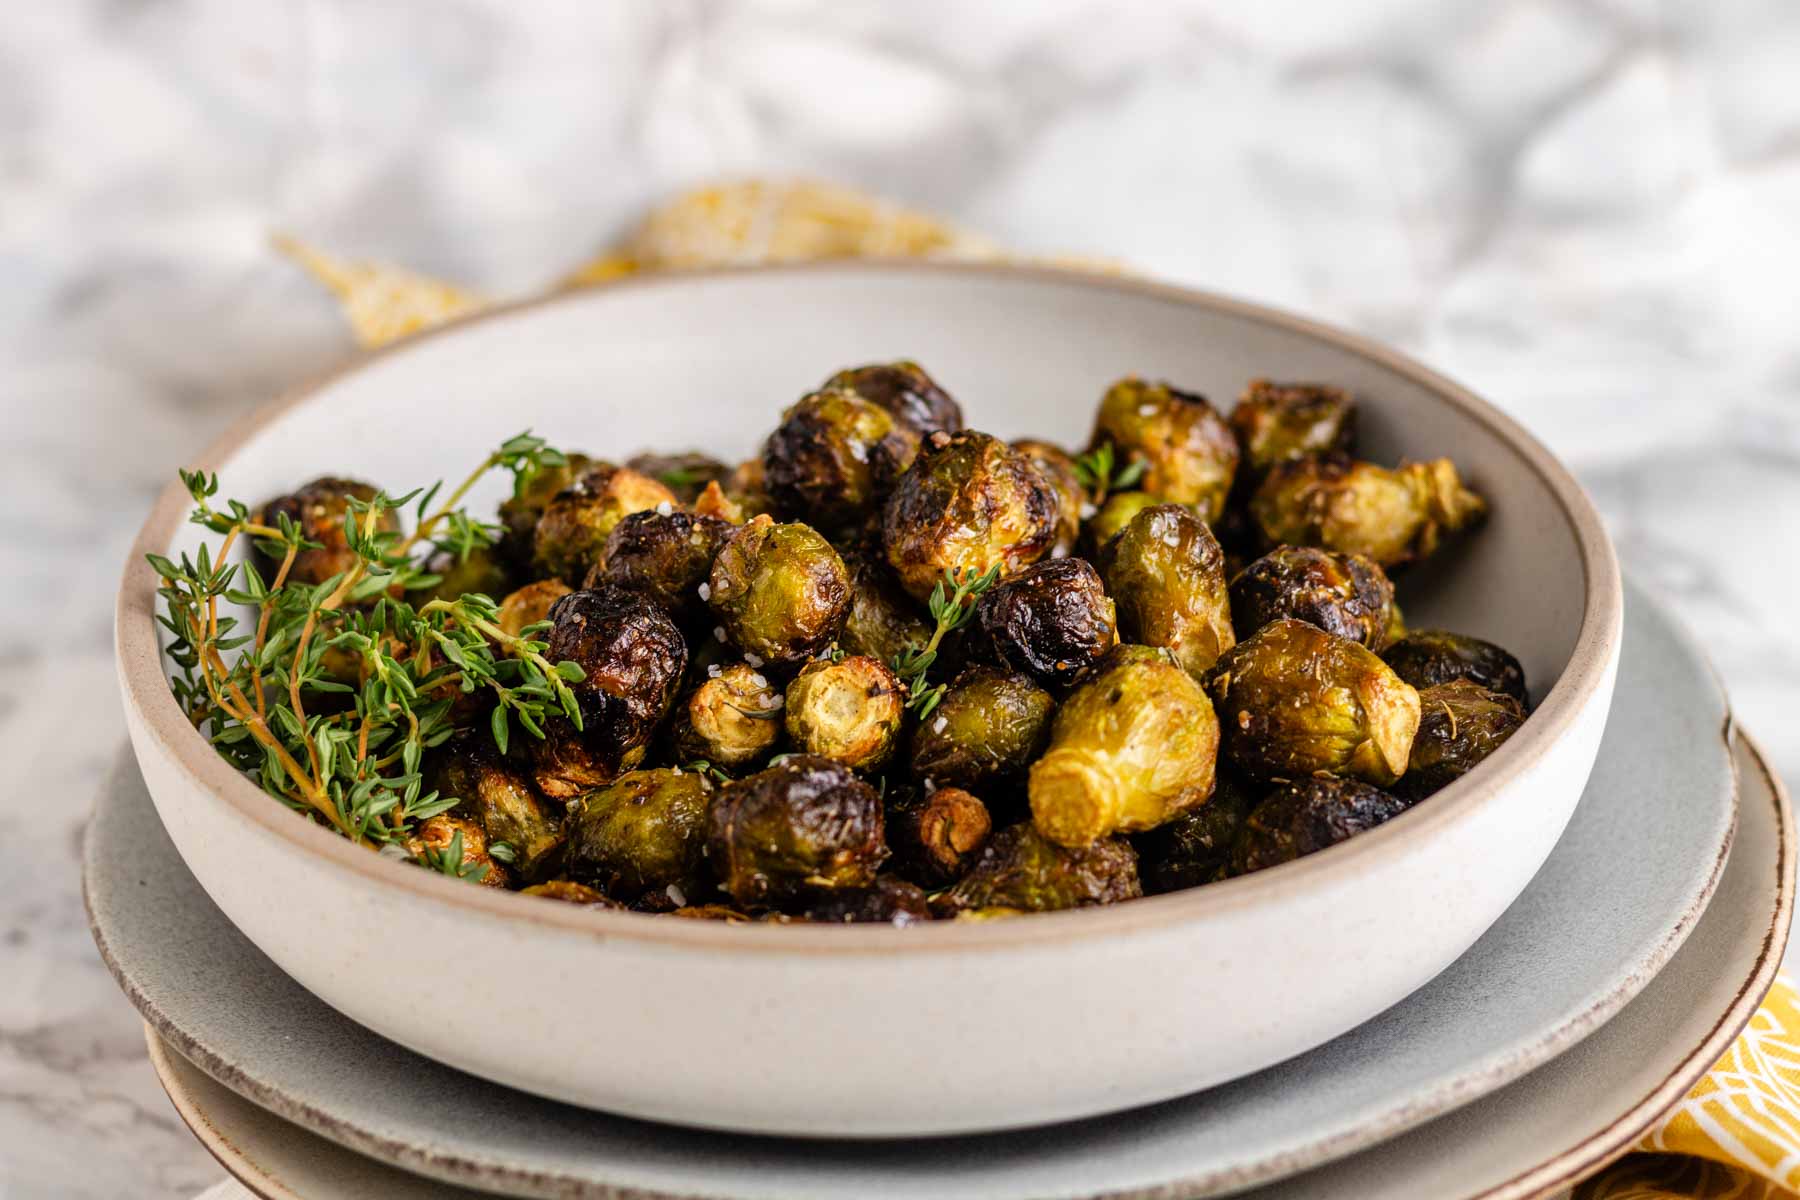 Roasted Brussels sprouts in a bowl.